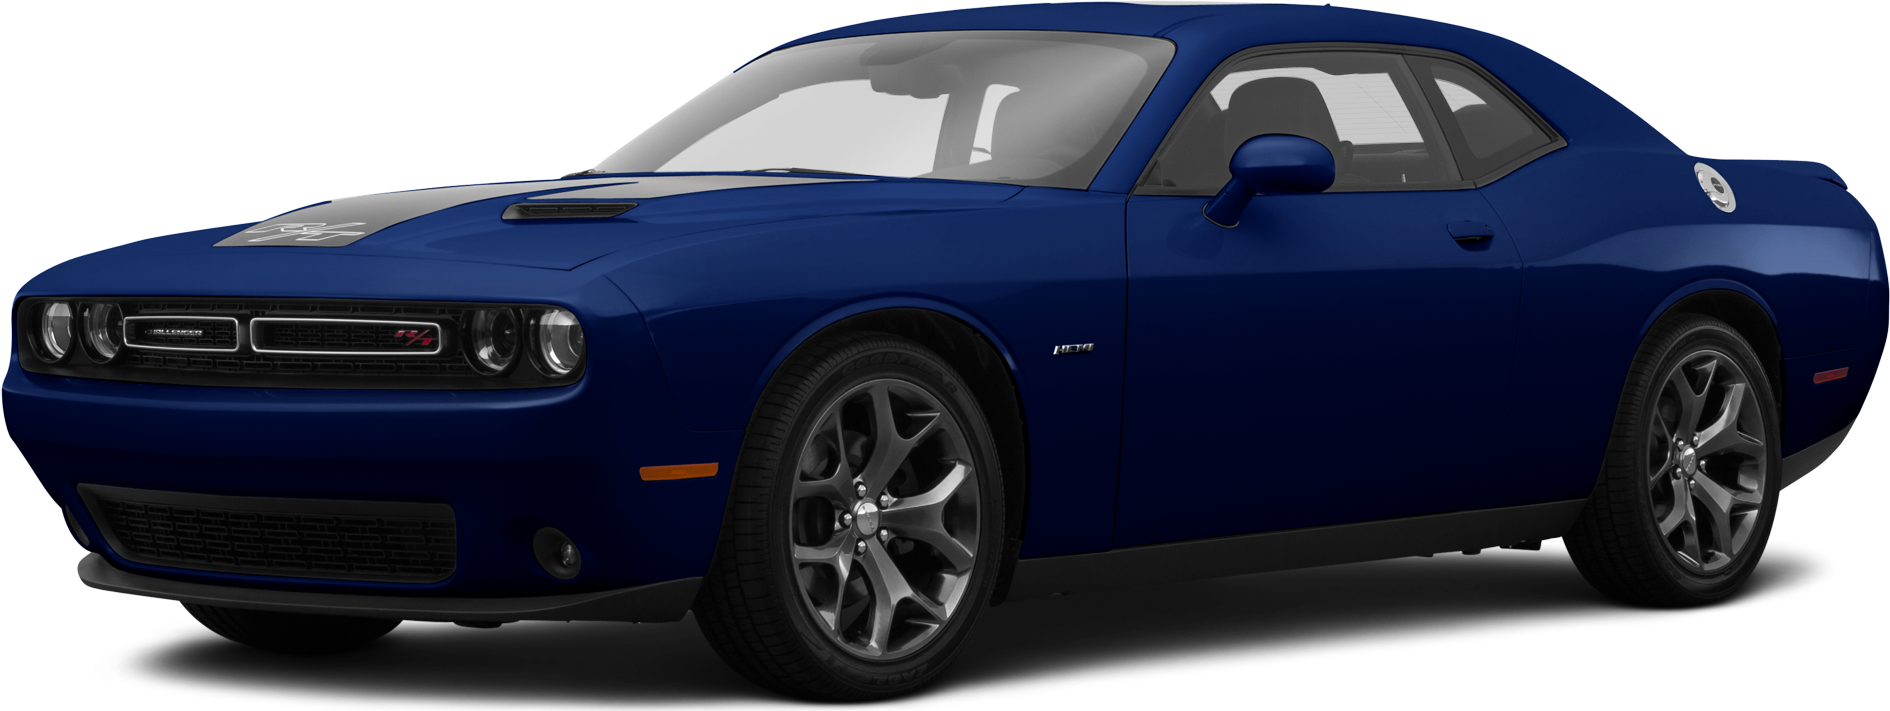 2015 Dodge Challenger Price Value Ratings And Reviews Kelley Blue Book